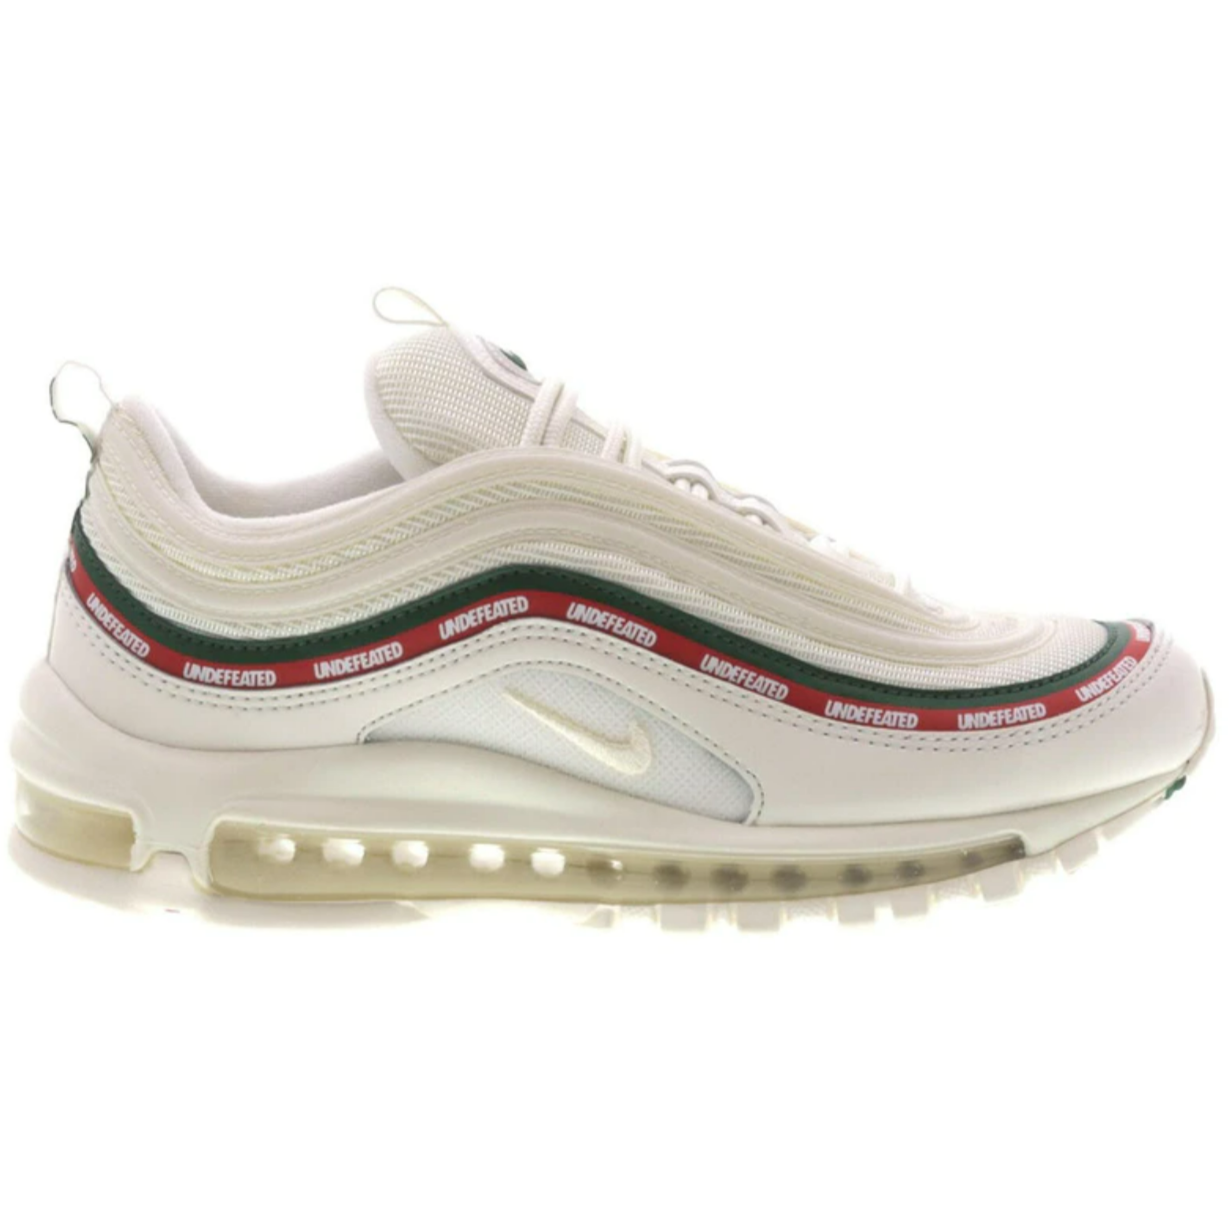 Nike Air Max 97 UNDFTD White by Nike from £550.00